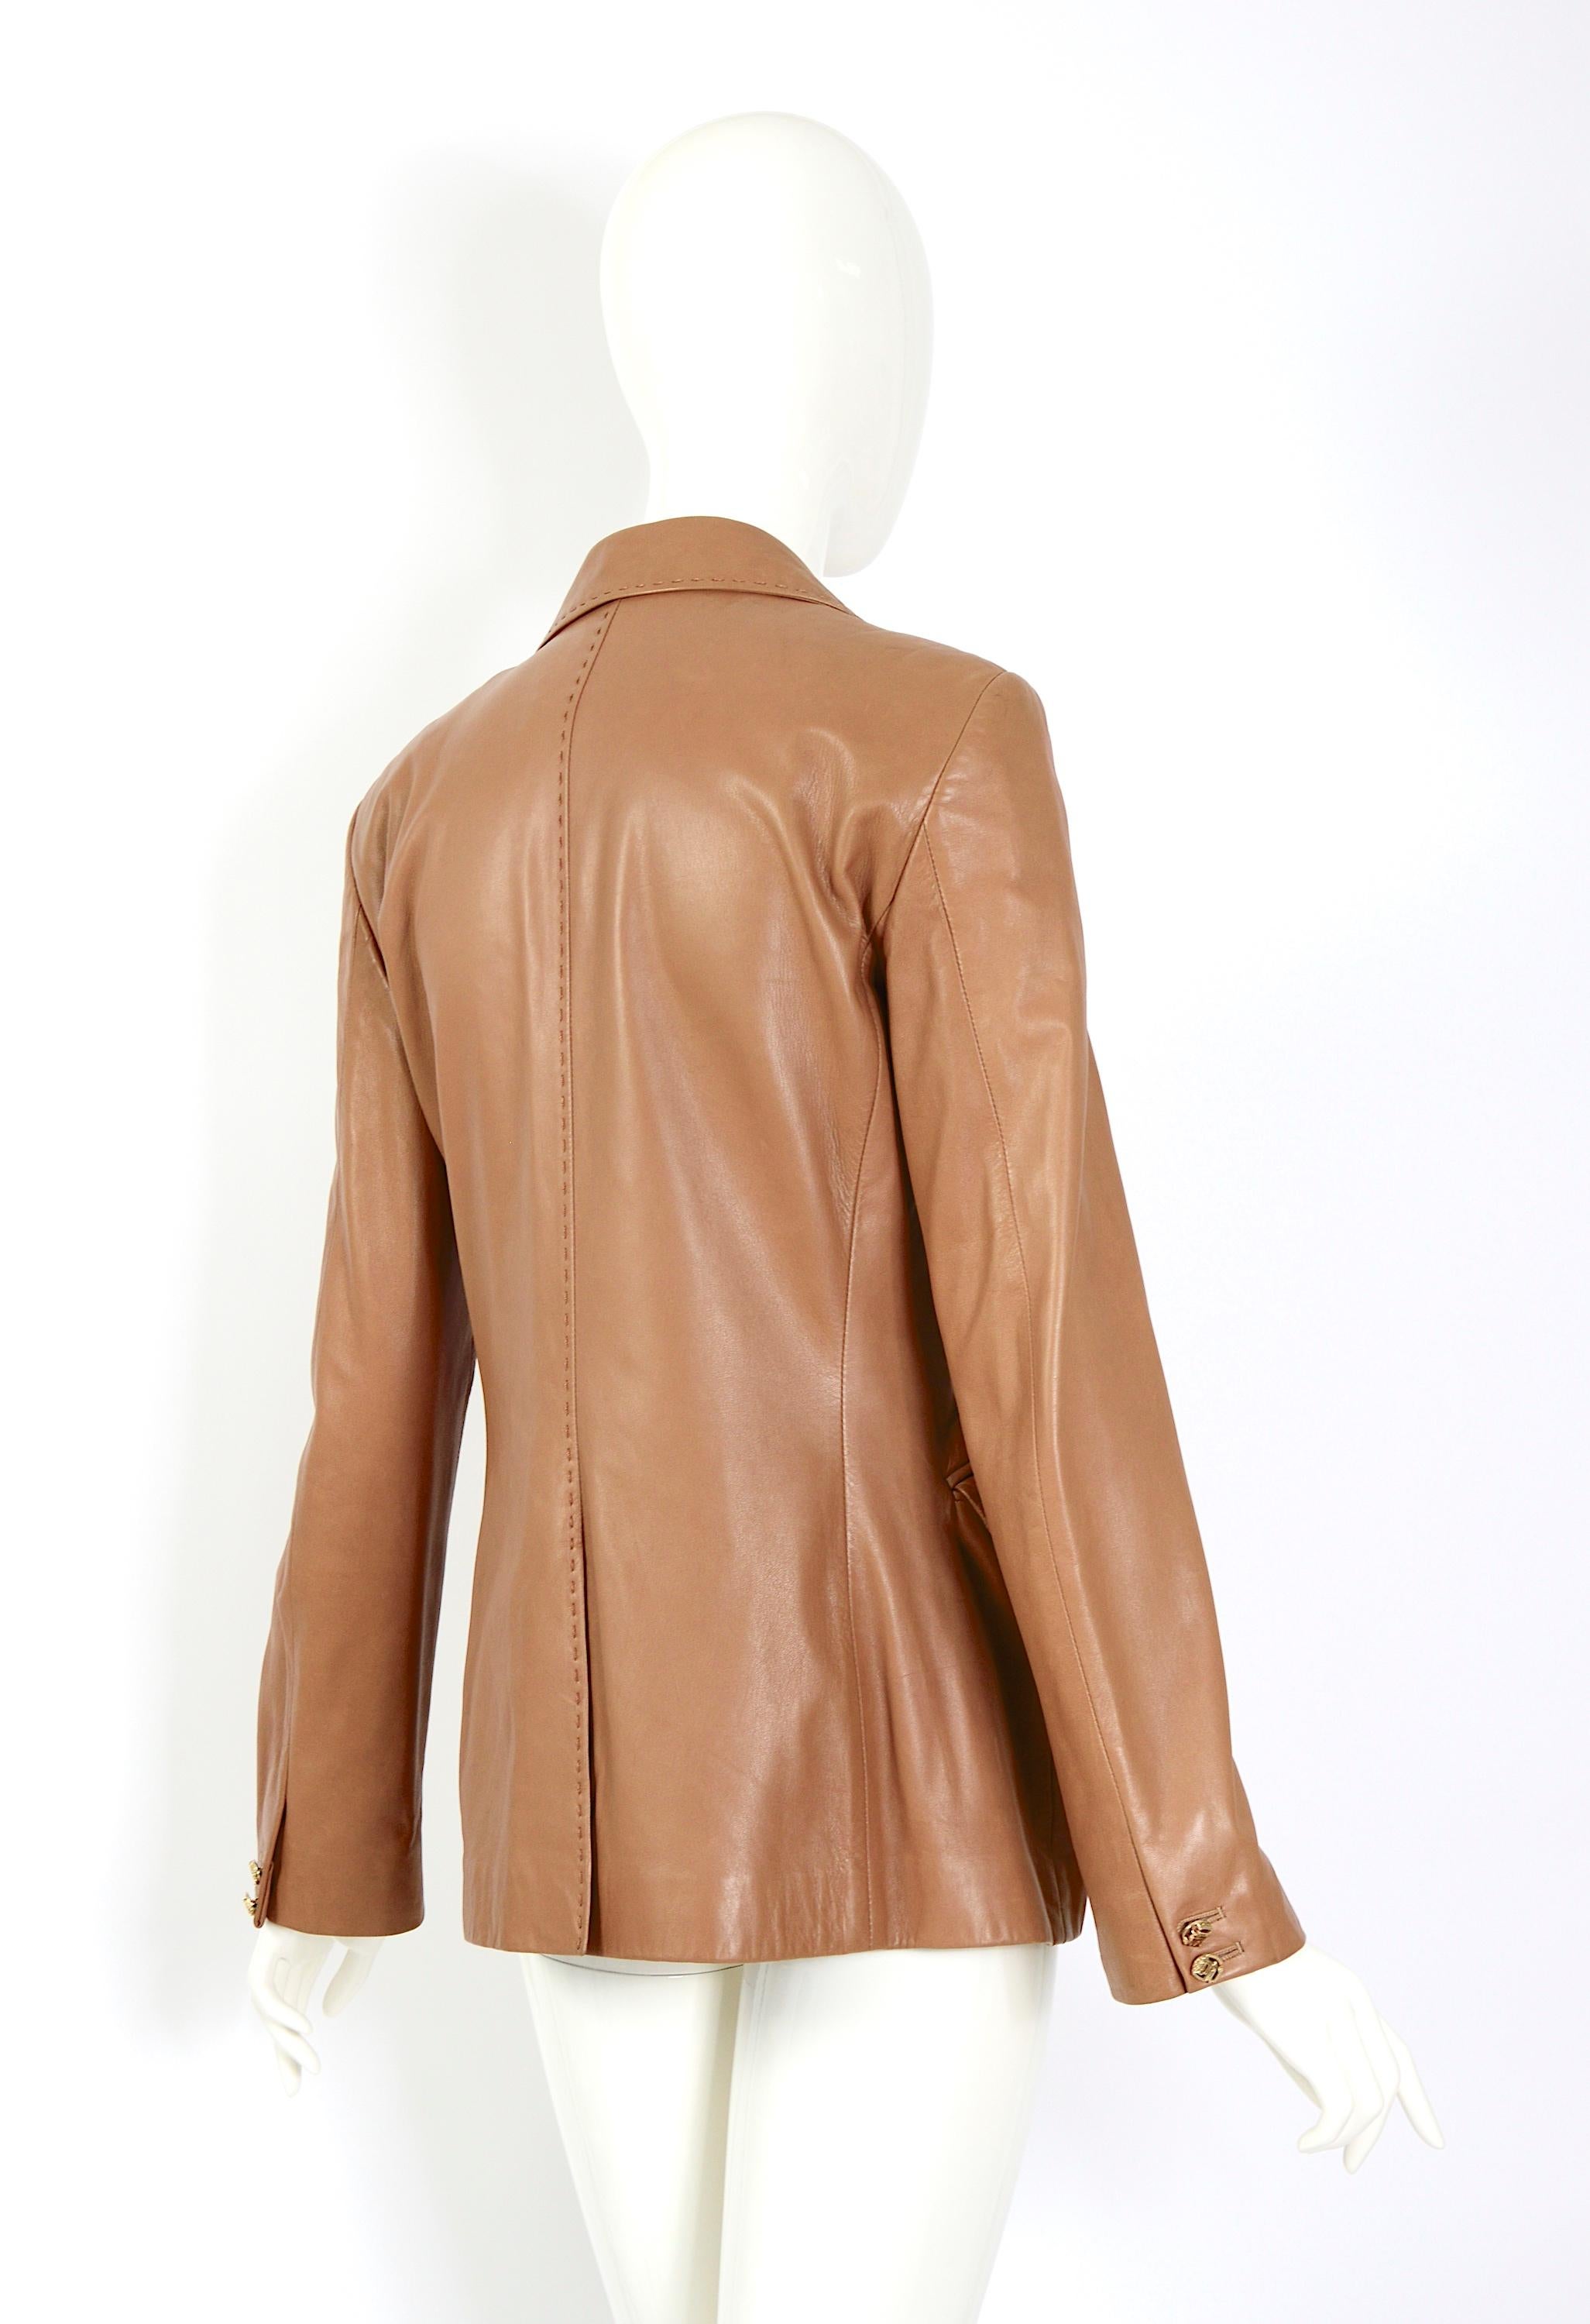 Vintage 1990s Gianni Versace timeless soft leather tailored jacket For Sale 1